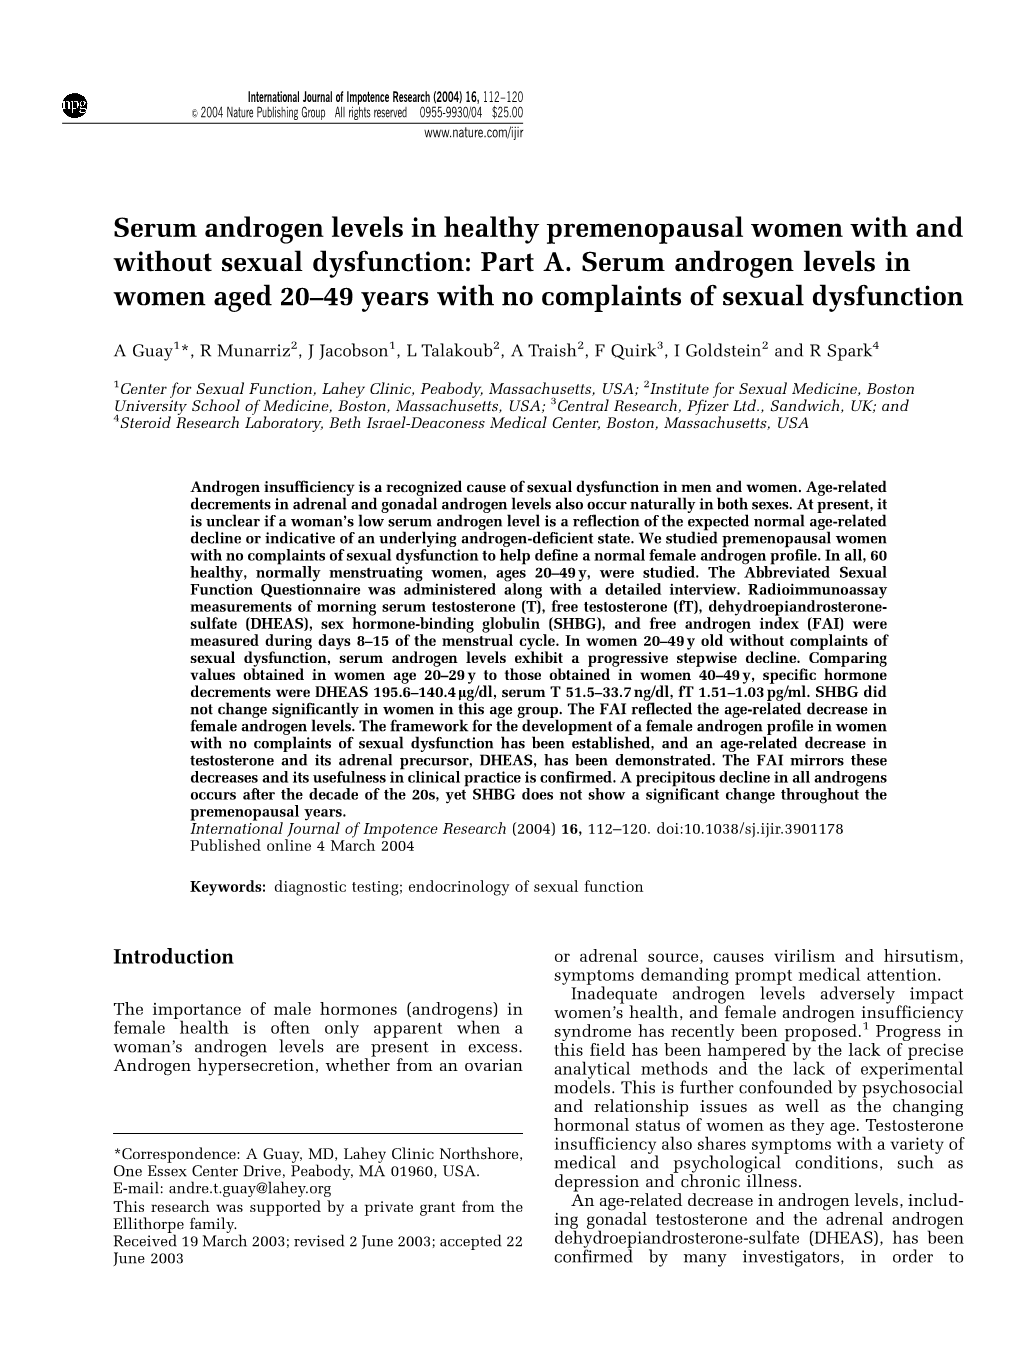 Part A. Serum Androgen Levels in Women Aged 20–49 Years with No Complaints of Sexual Dysfunction